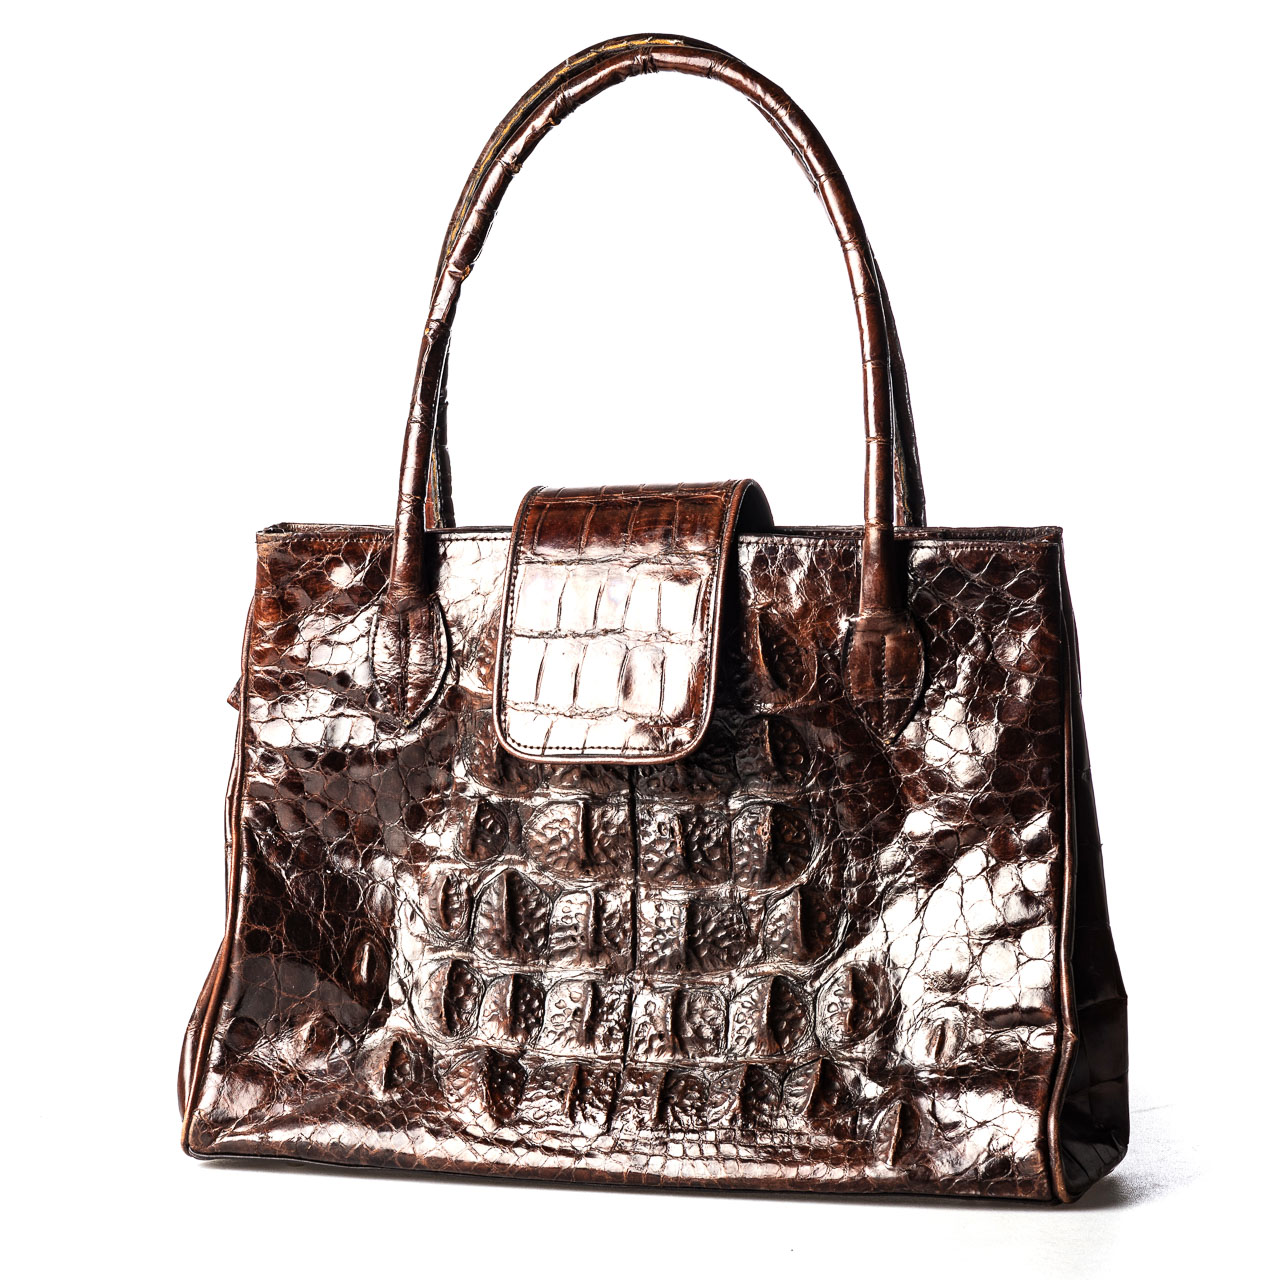 A LEATHER HANDBAG Crocodile, four internal compartments, secured by a zip25cm high, 40cm wide